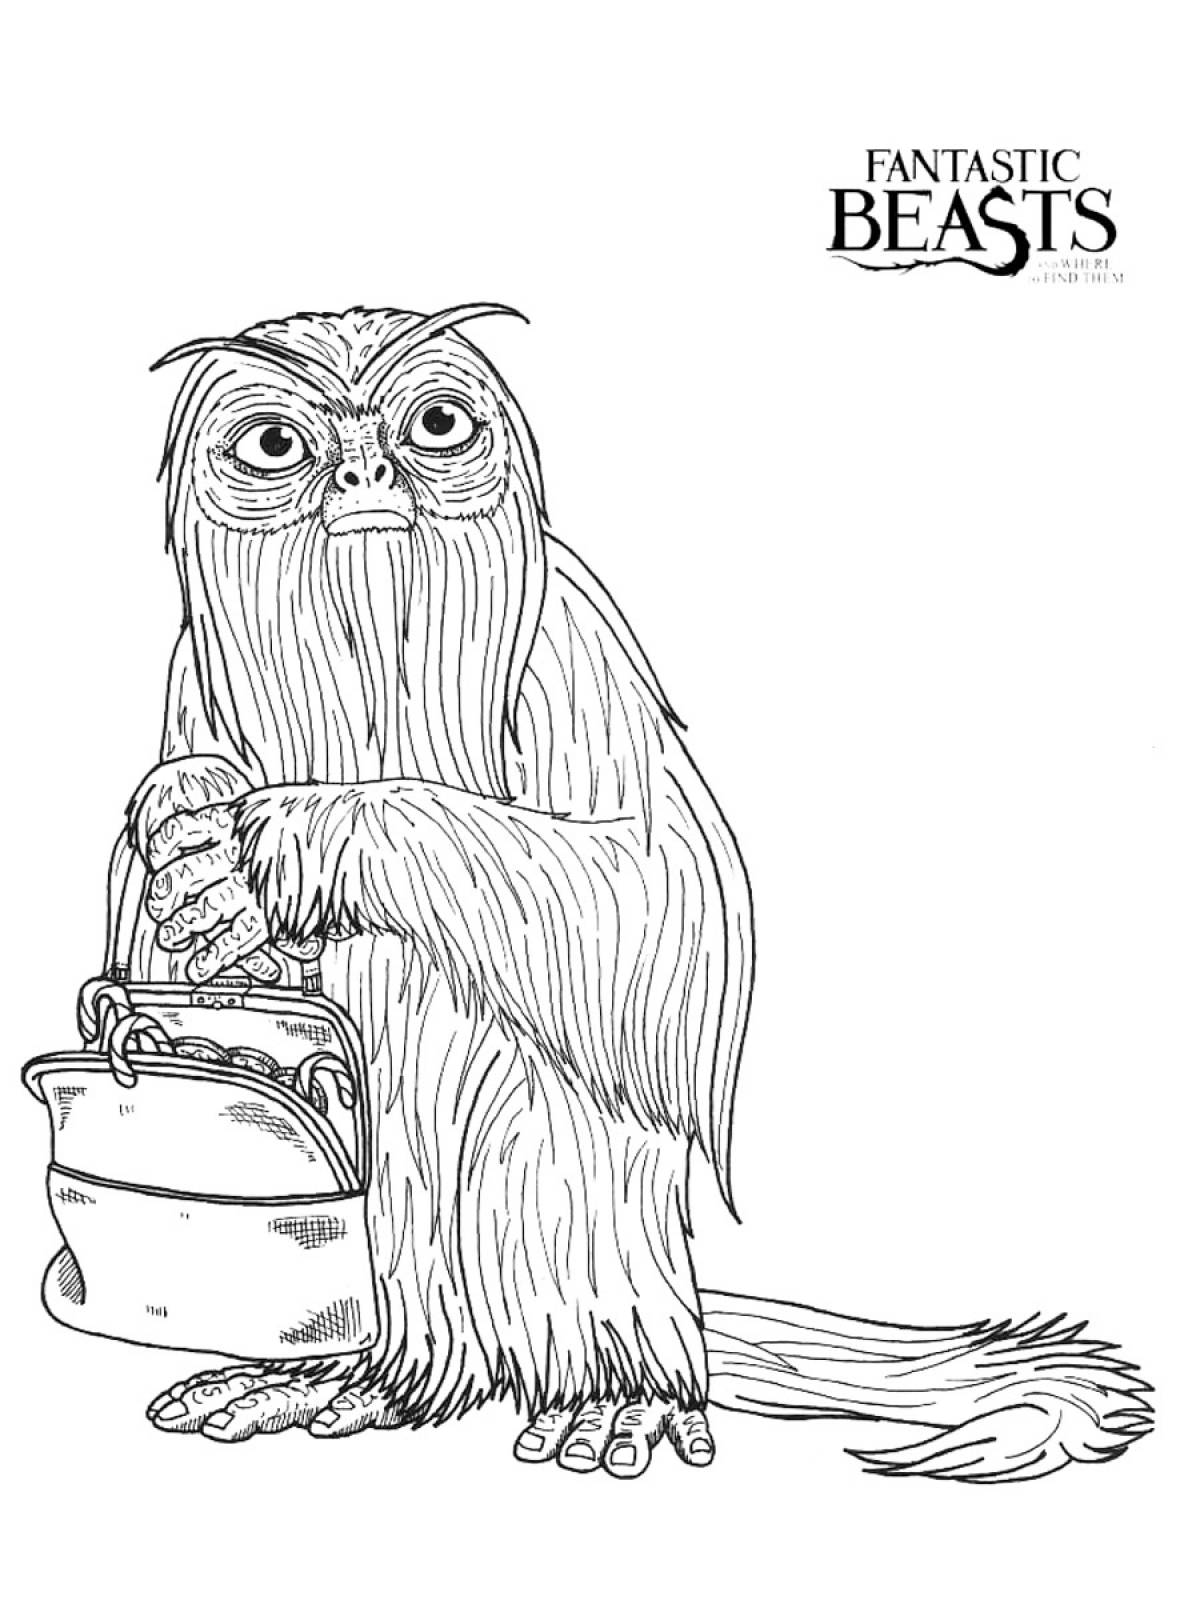 Fantastic beasts coloring book - deluxe